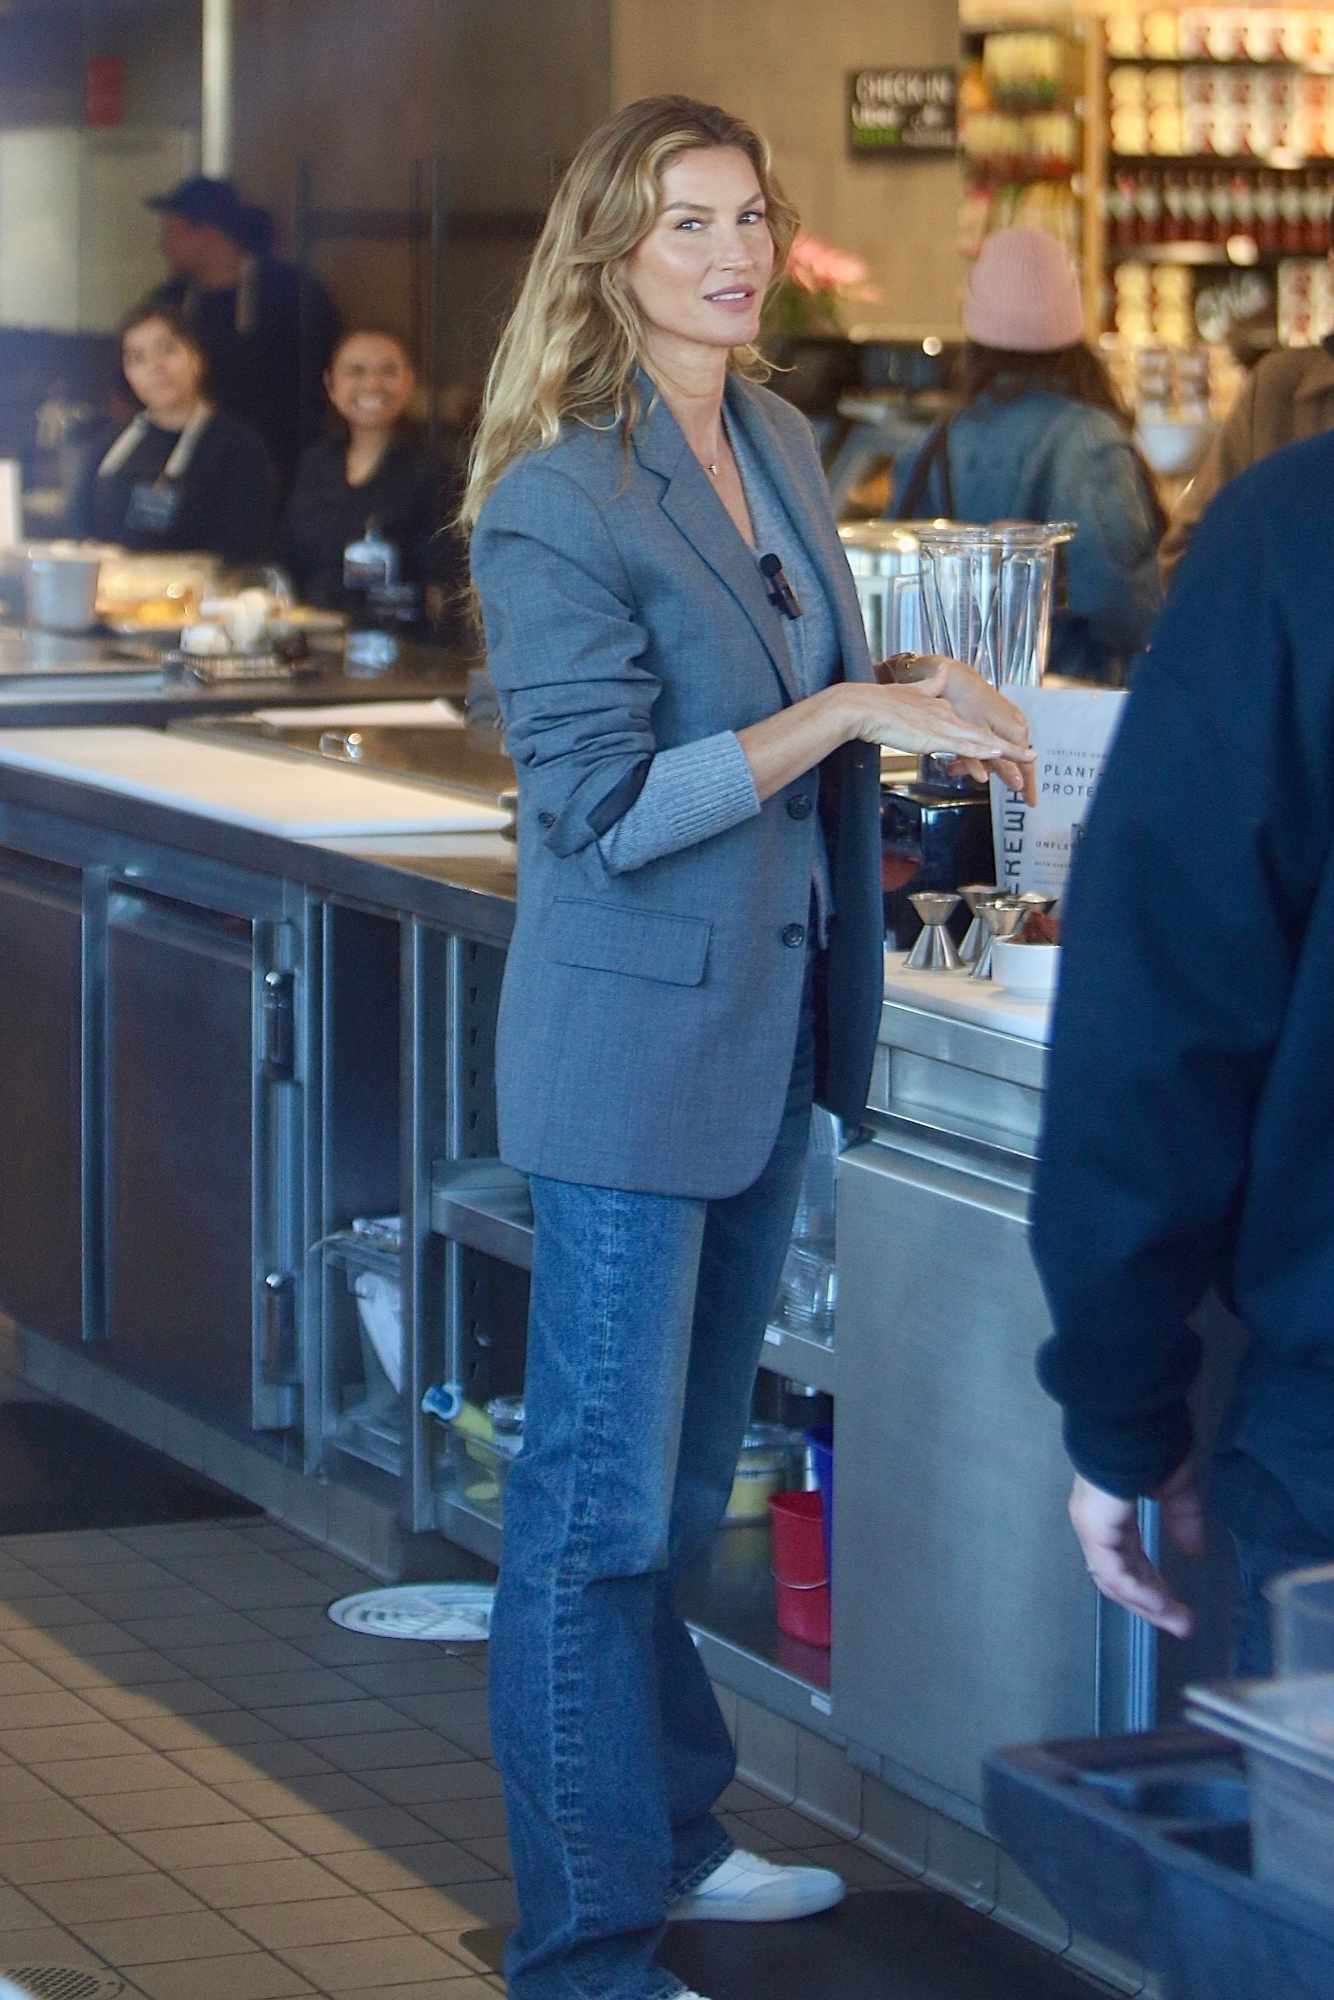 Gisele Bundchen's Erewhon smoothie, the Giselderberry Smoothie, being prepared on January 11, 2024